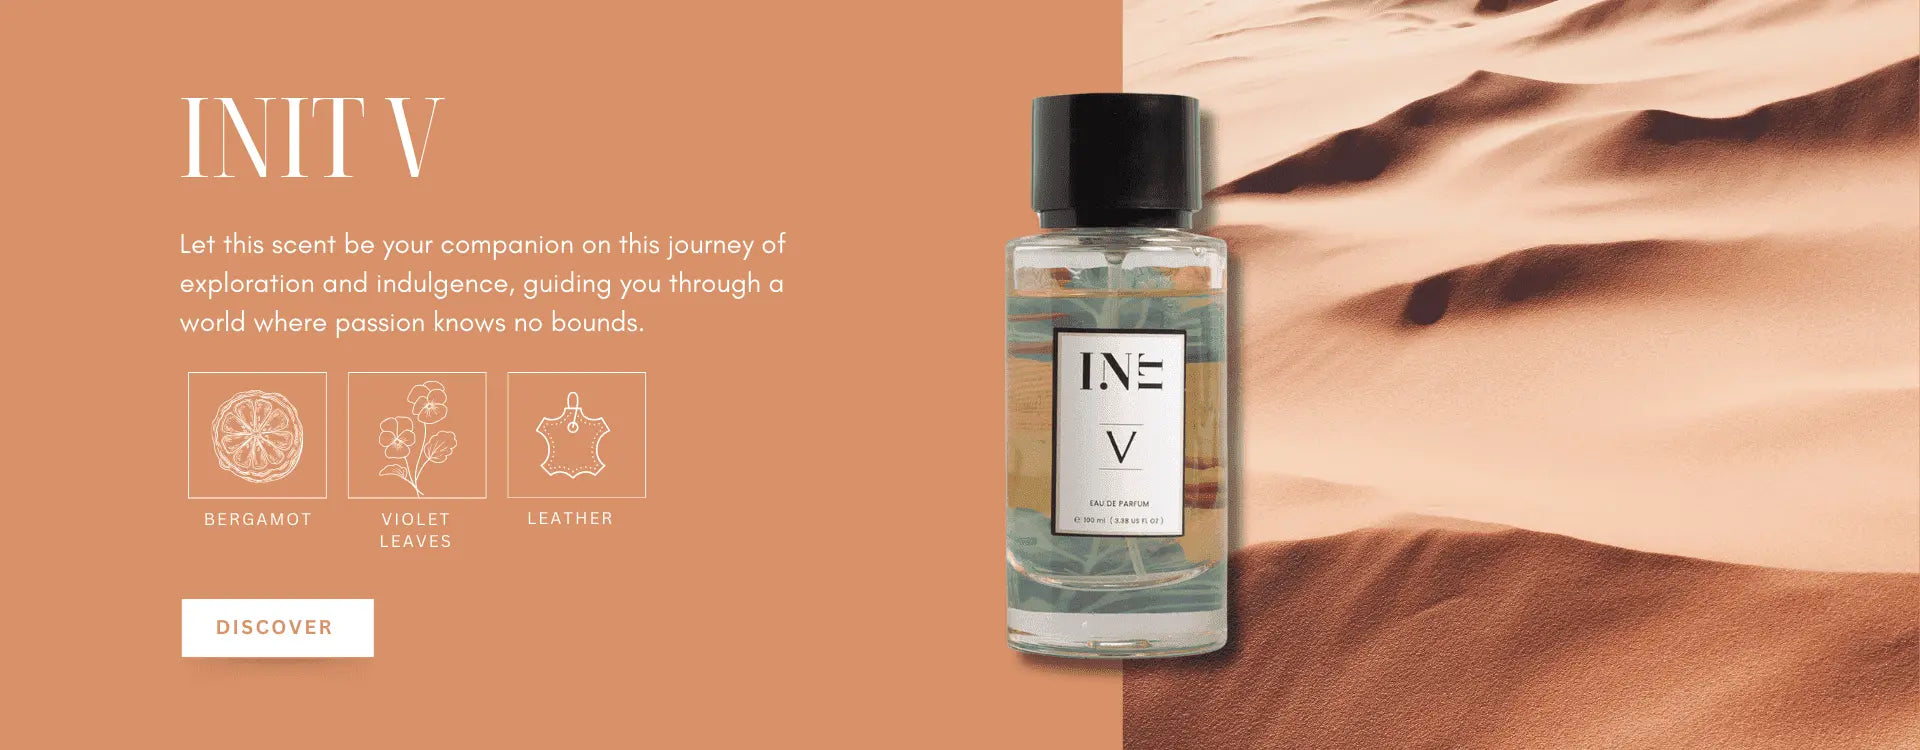 INIT No.V - Unconventionally Spicy Leather Perfume